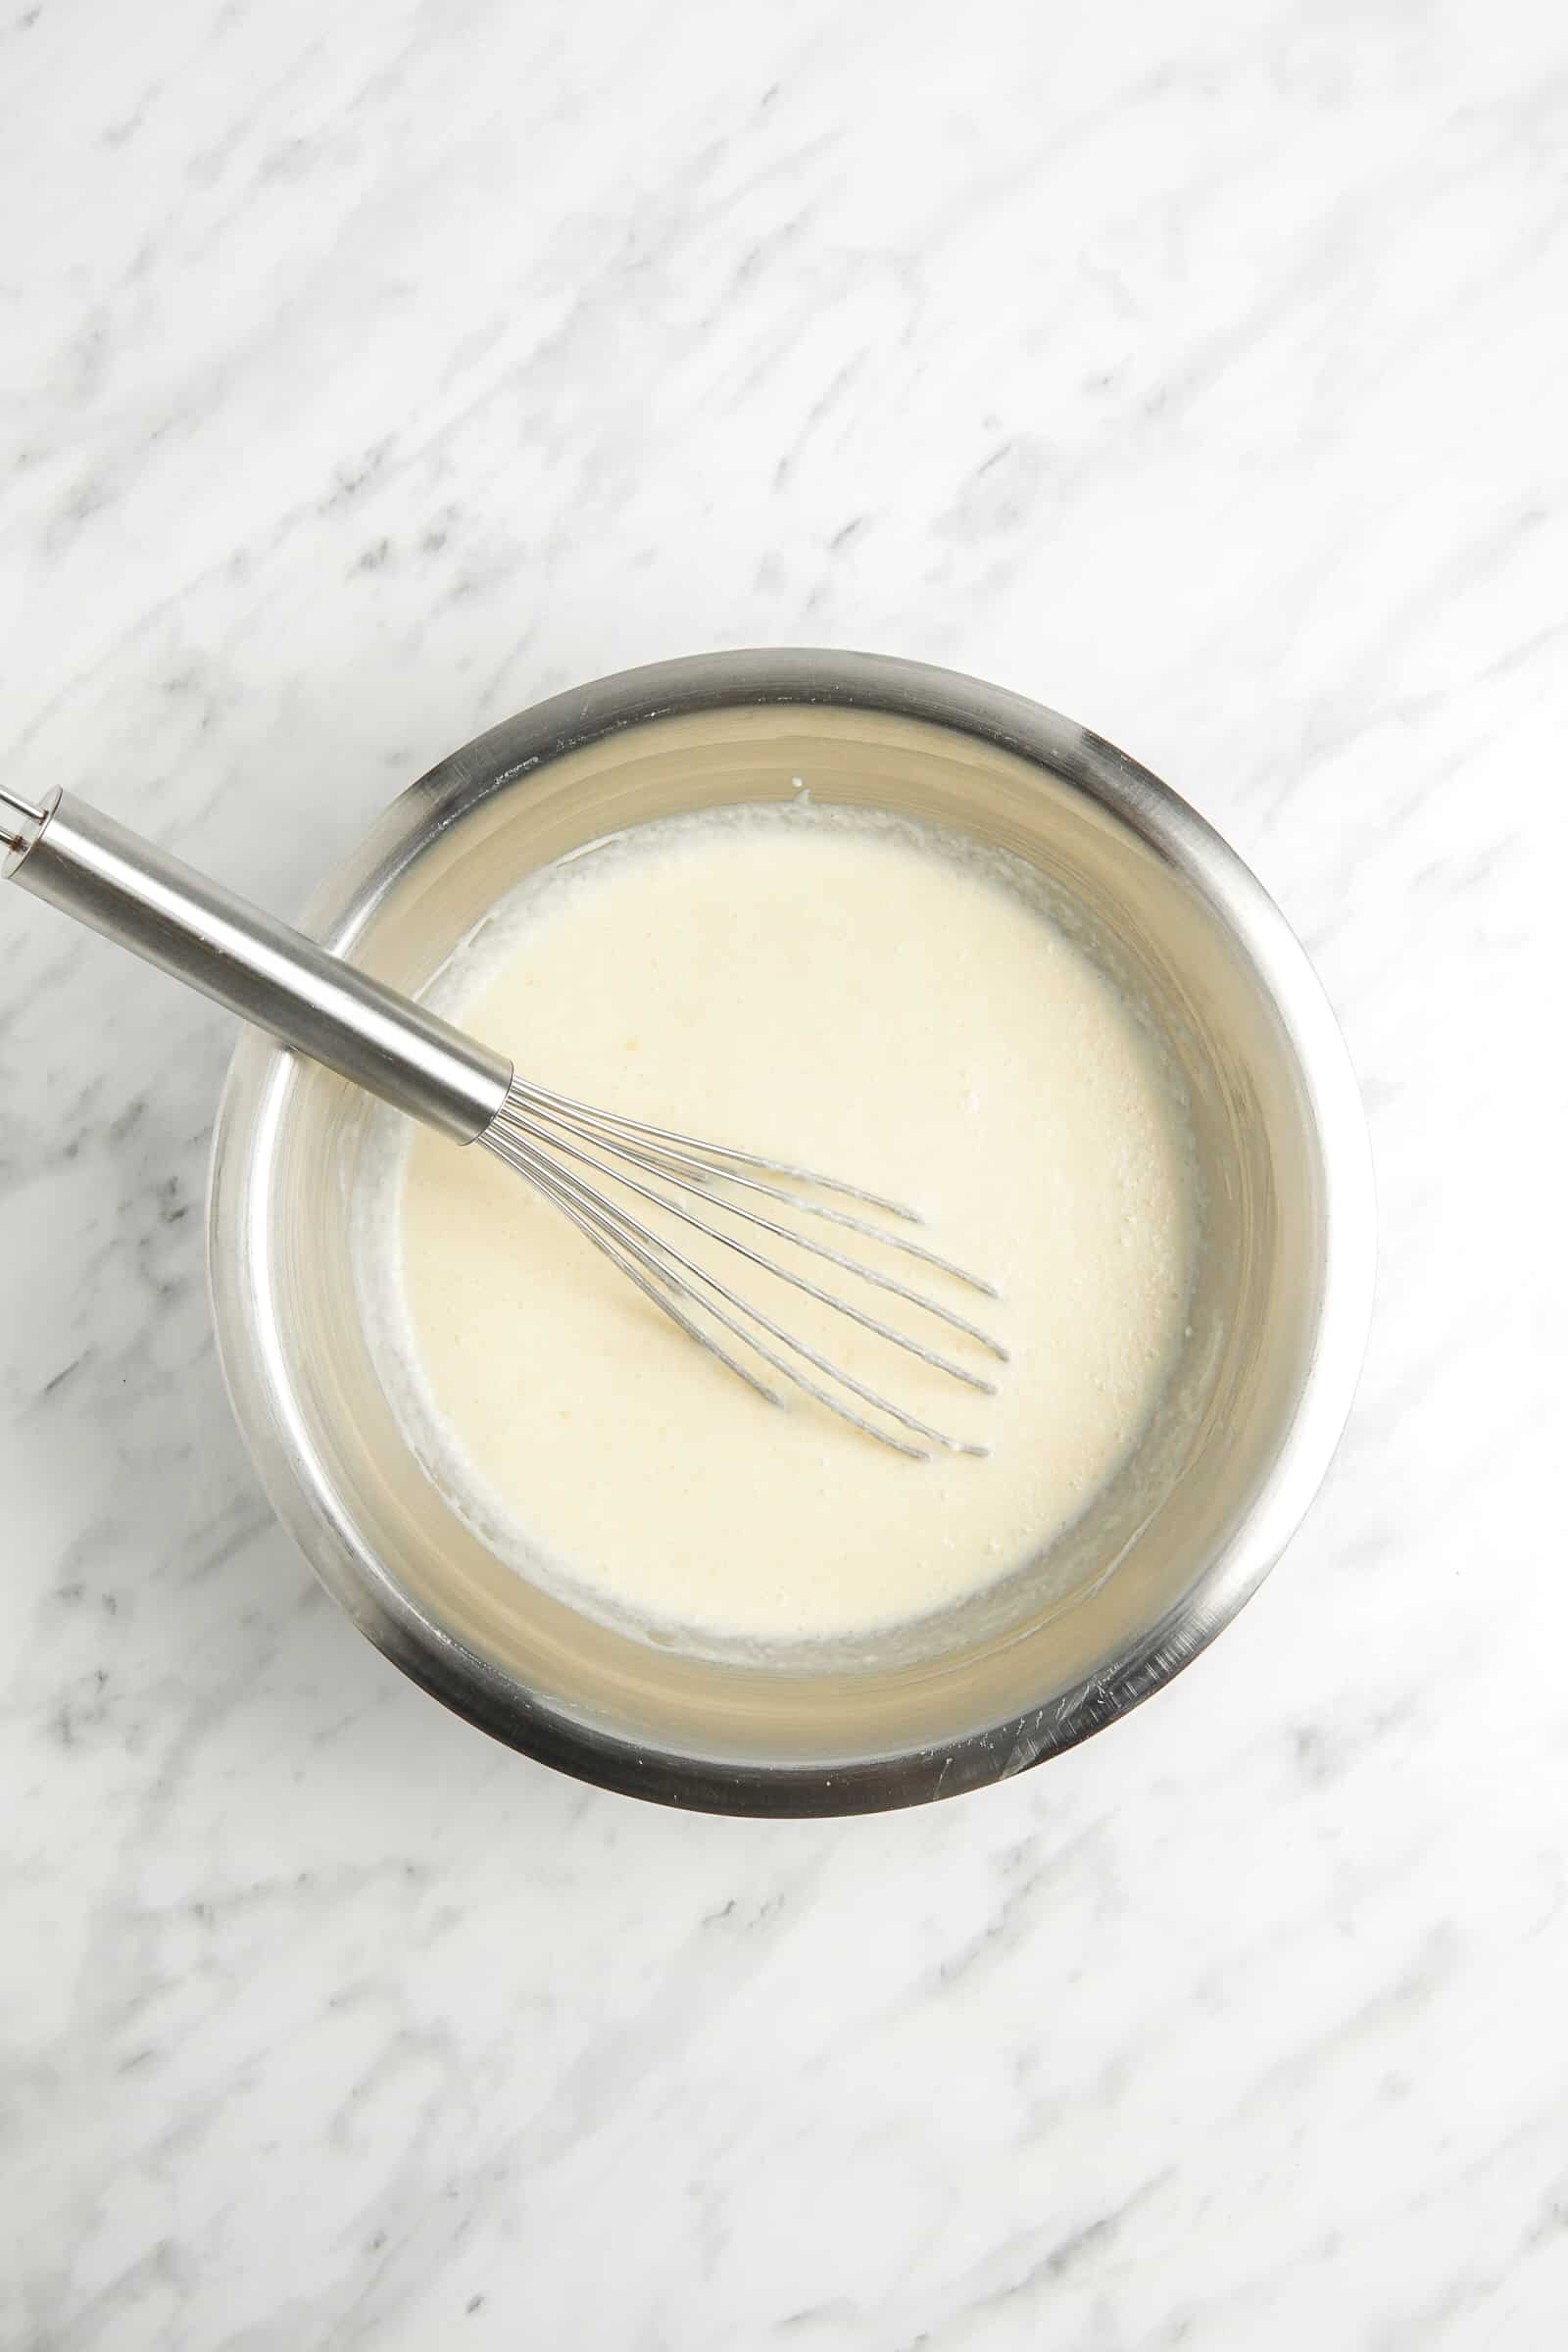 smooth crepe batter in a bowl with a whisk